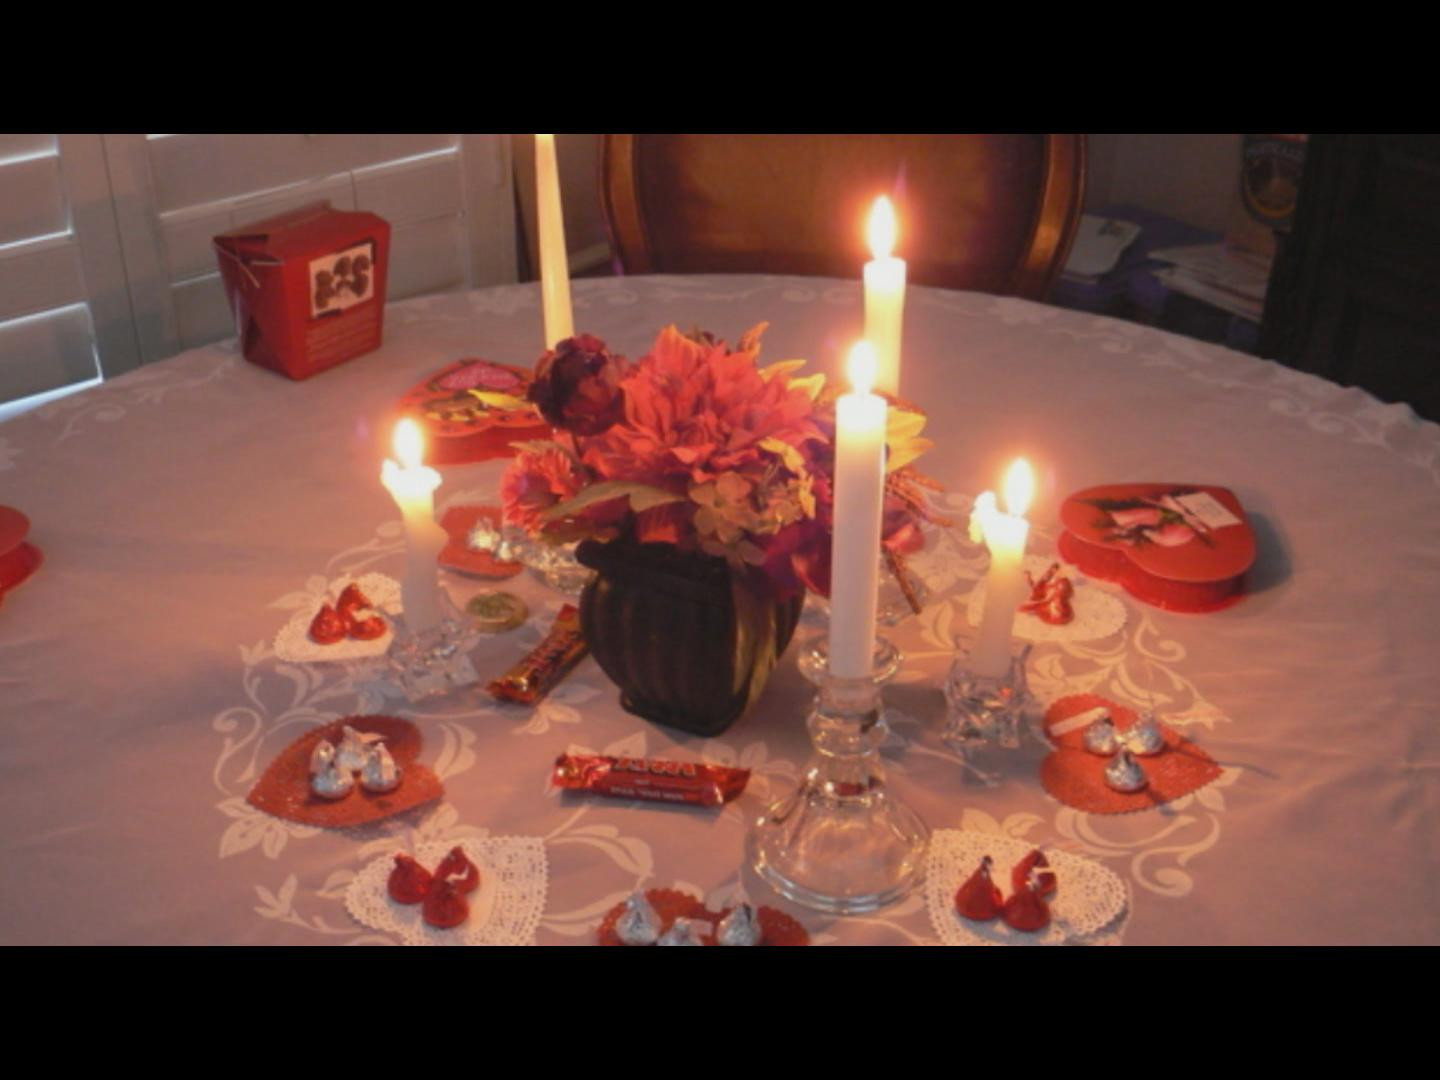 Romantic Valentines Dinners At Home
 Stay at Home Valentine s Day Ideas